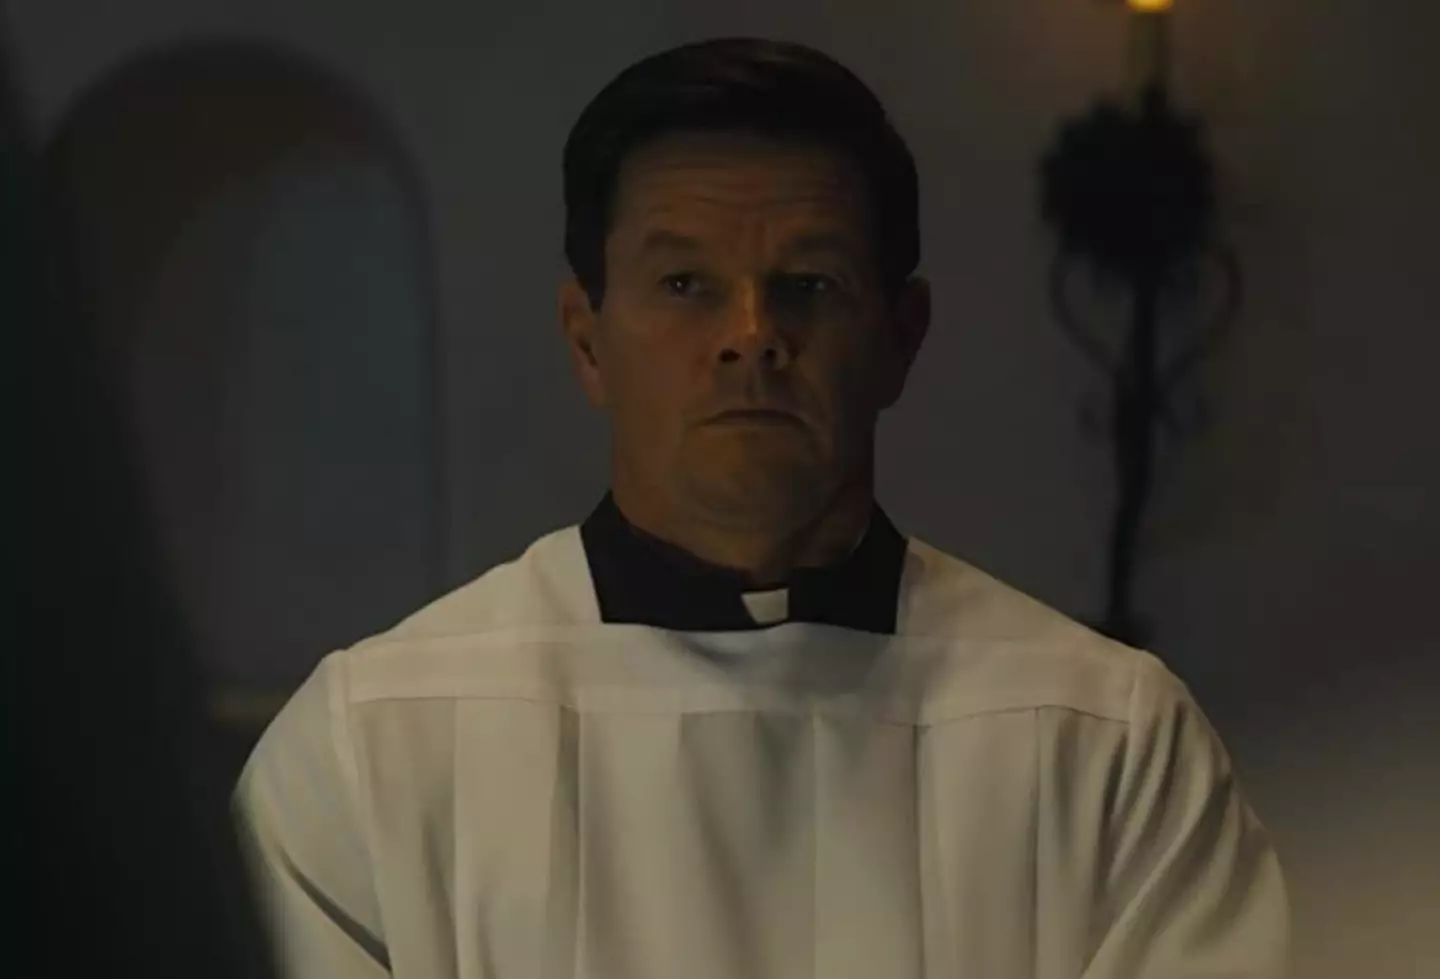 Wahlberg plays the role of a Catholic priest in Father Stu.